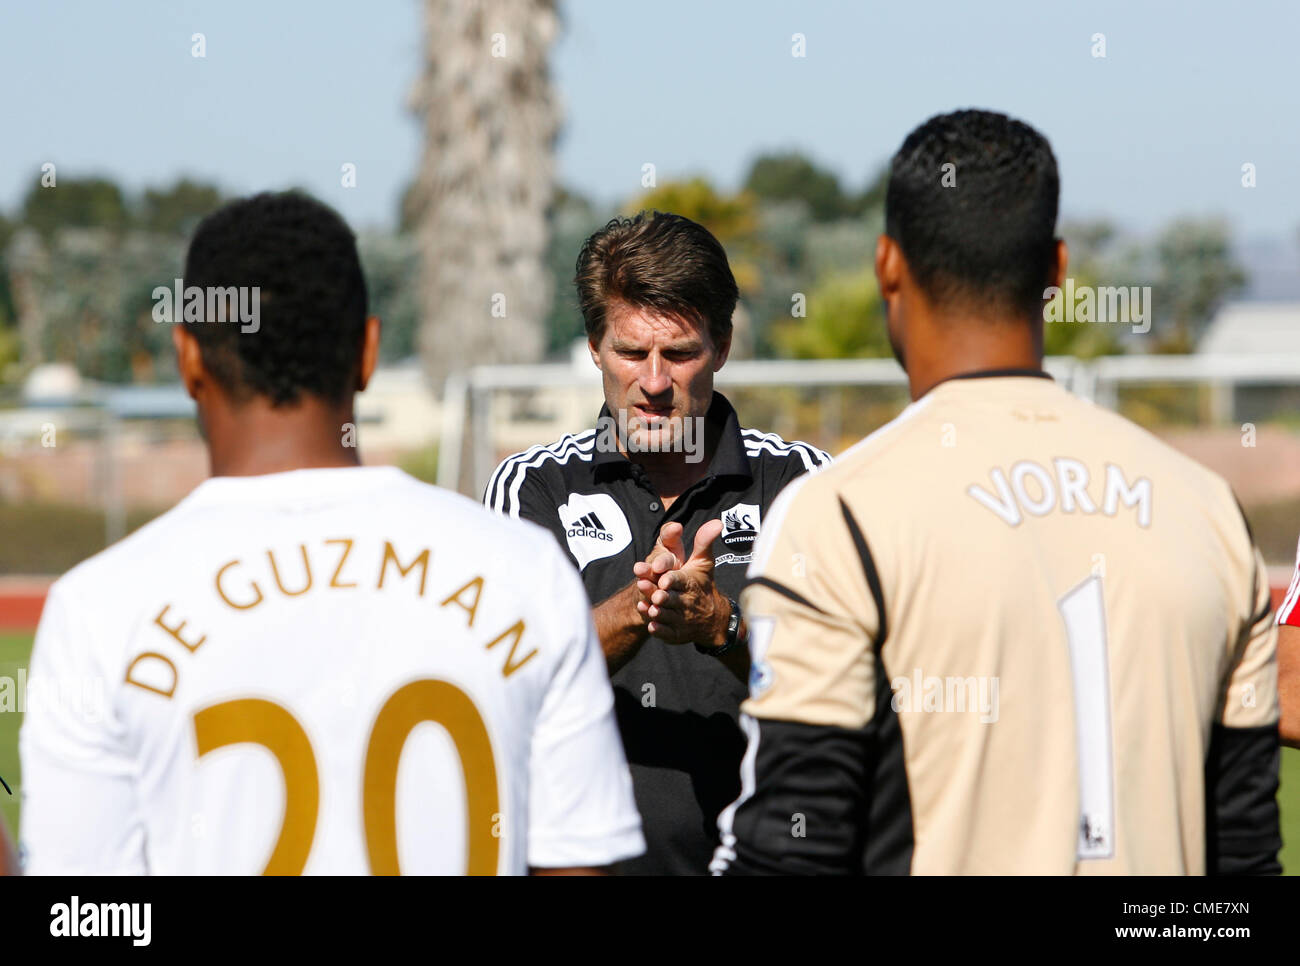 MICHAEL LAUDRUP GIVES TEAM TAL SWANSEA CITY A.F.C. MANAGER OXNARD CALIFORNIA USA 28 July 2012 Stock Photo